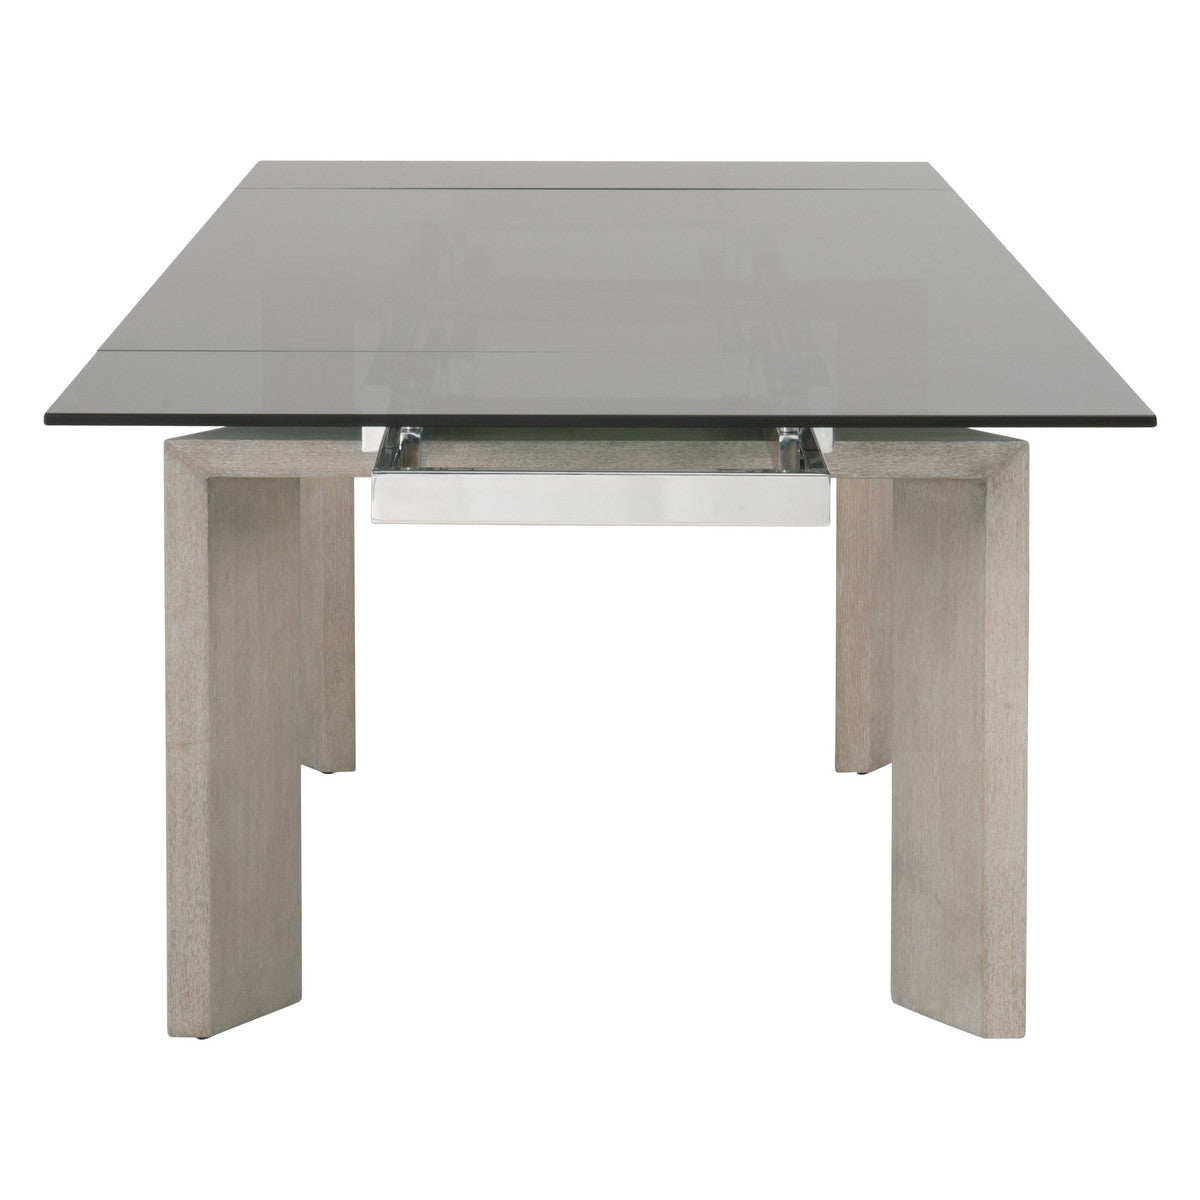 Henley Dining Table